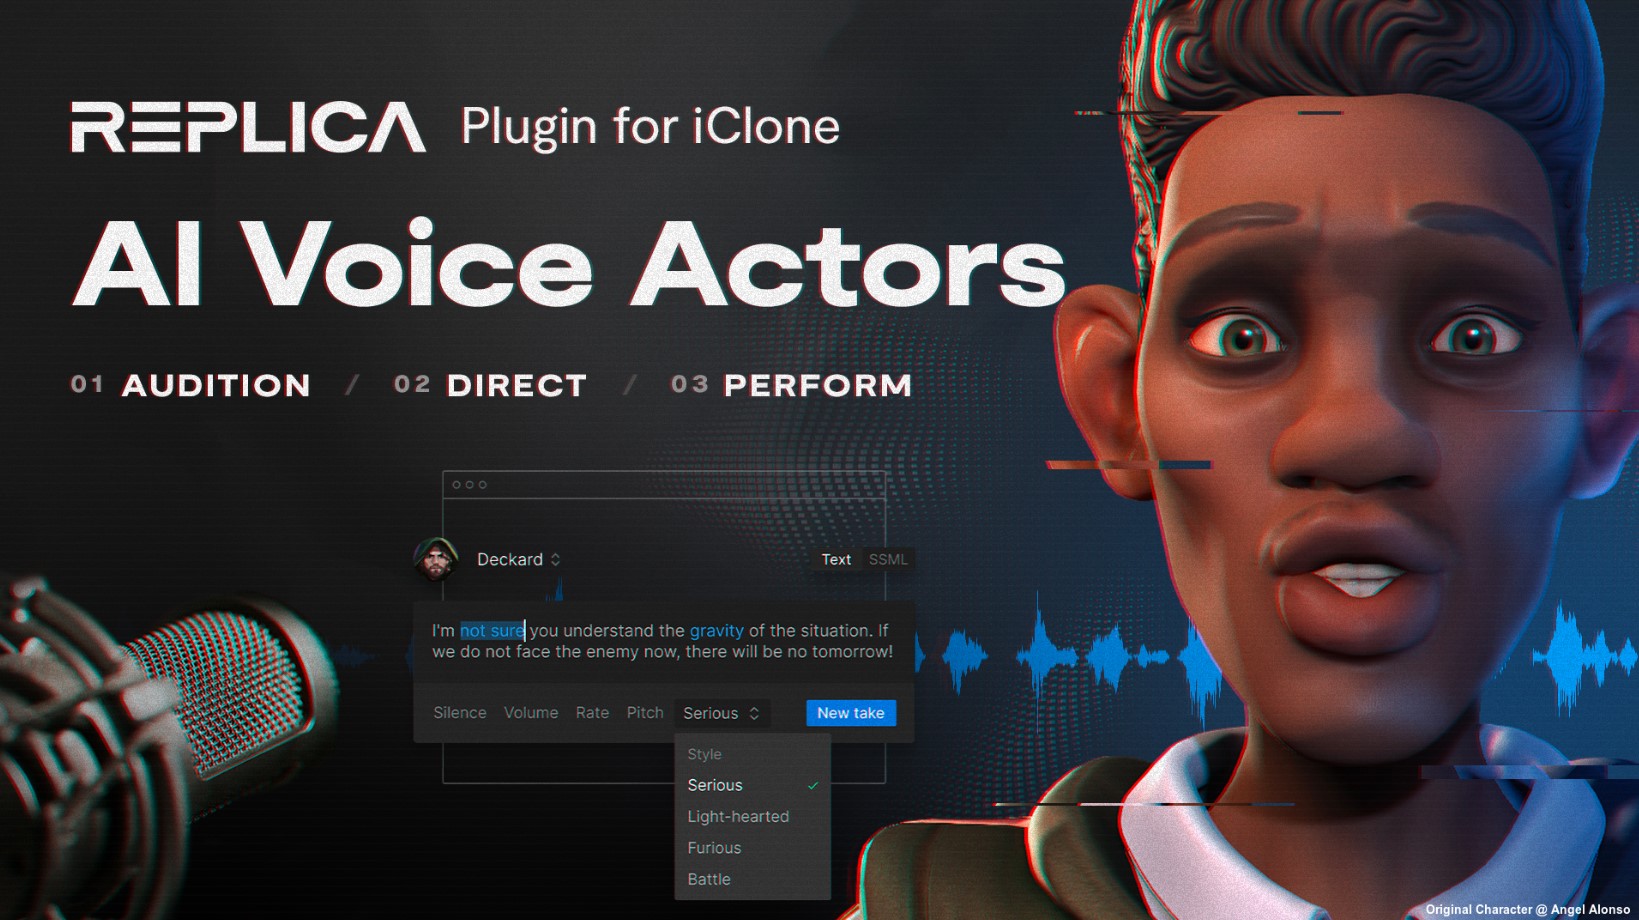 Replica Studios Have Already Developed An AI Voice Acting Software In The Past